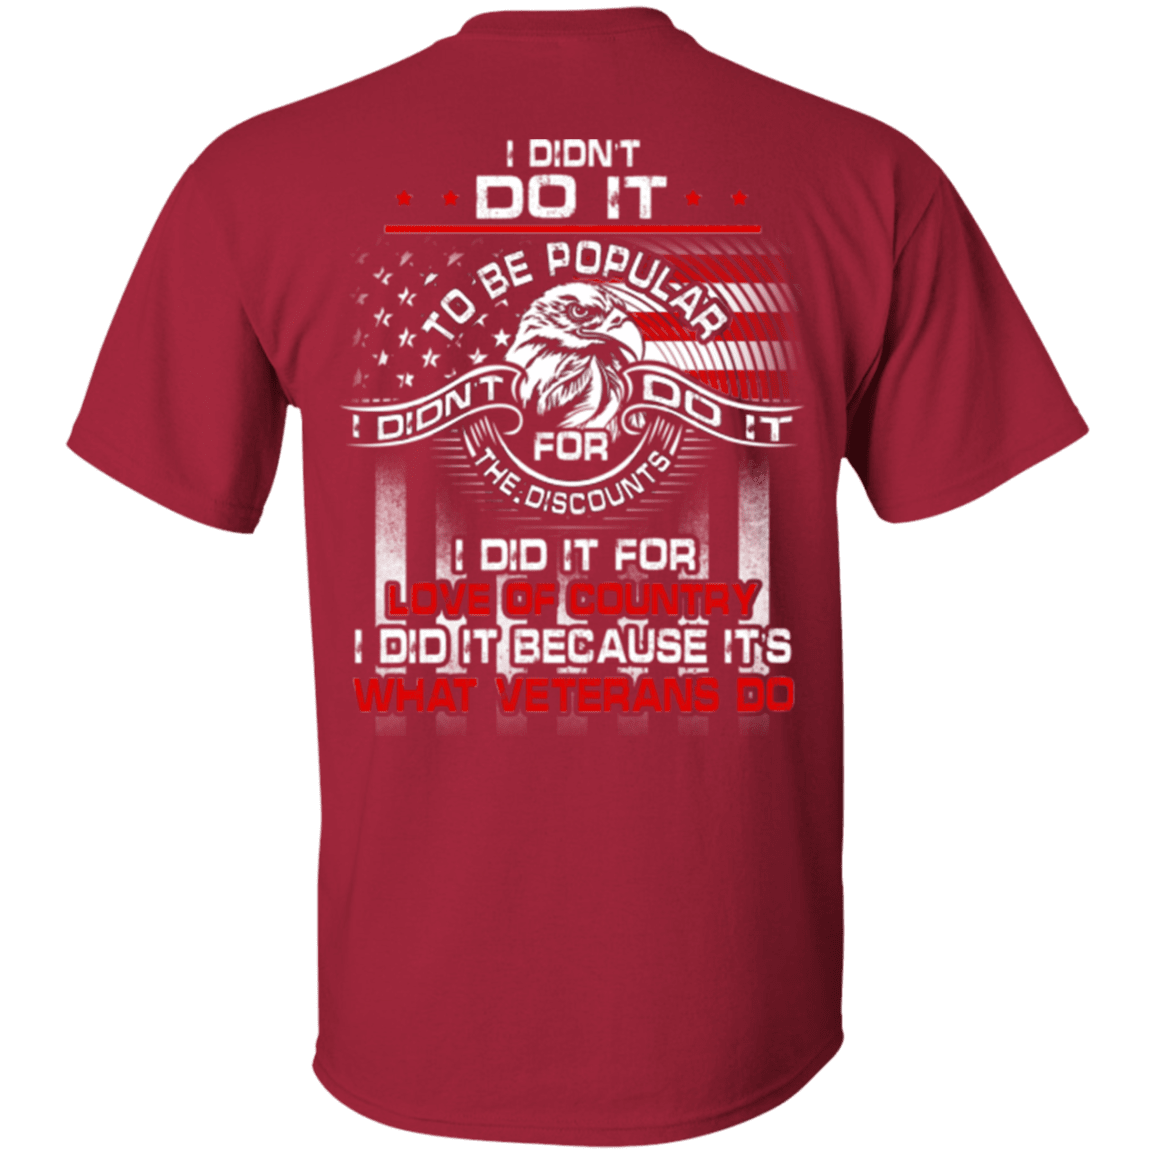 Military T-Shirt "I Did It Because It's What Veterans Do"-TShirt-General-Veterans Nation